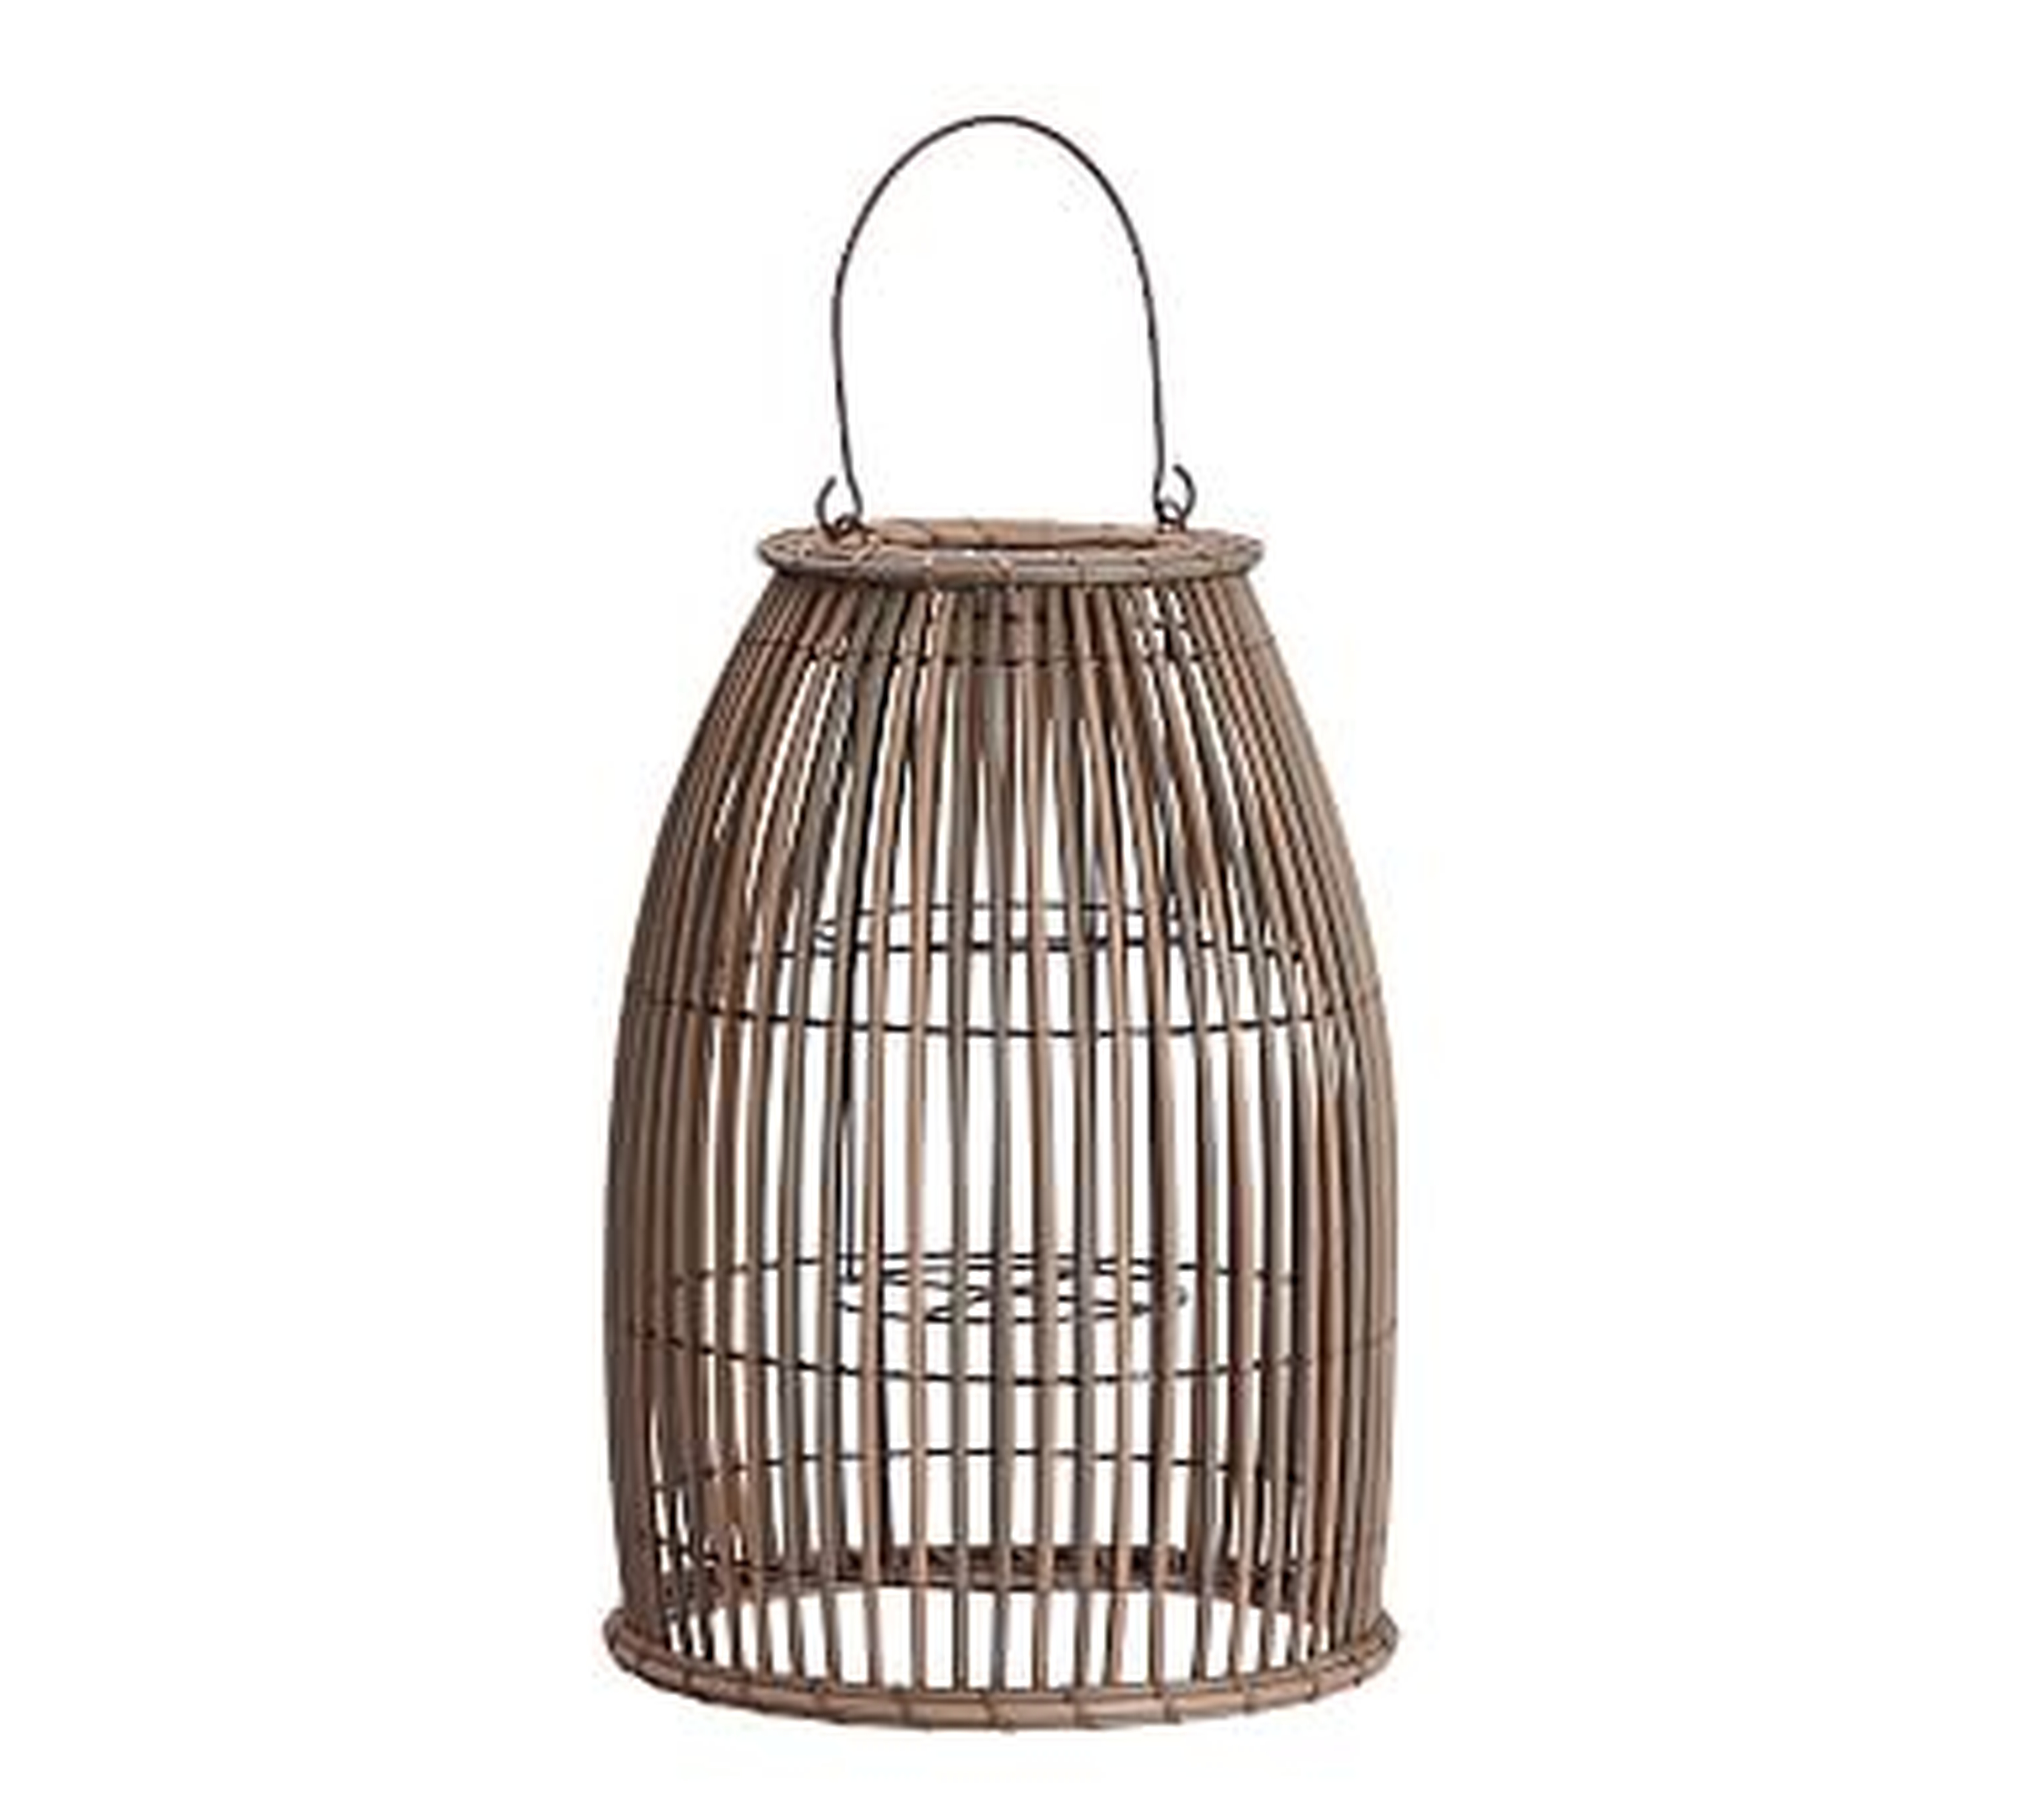 Careyes All-Weather Outdoor Wicker Lantern, Grey - Small - Pottery Barn